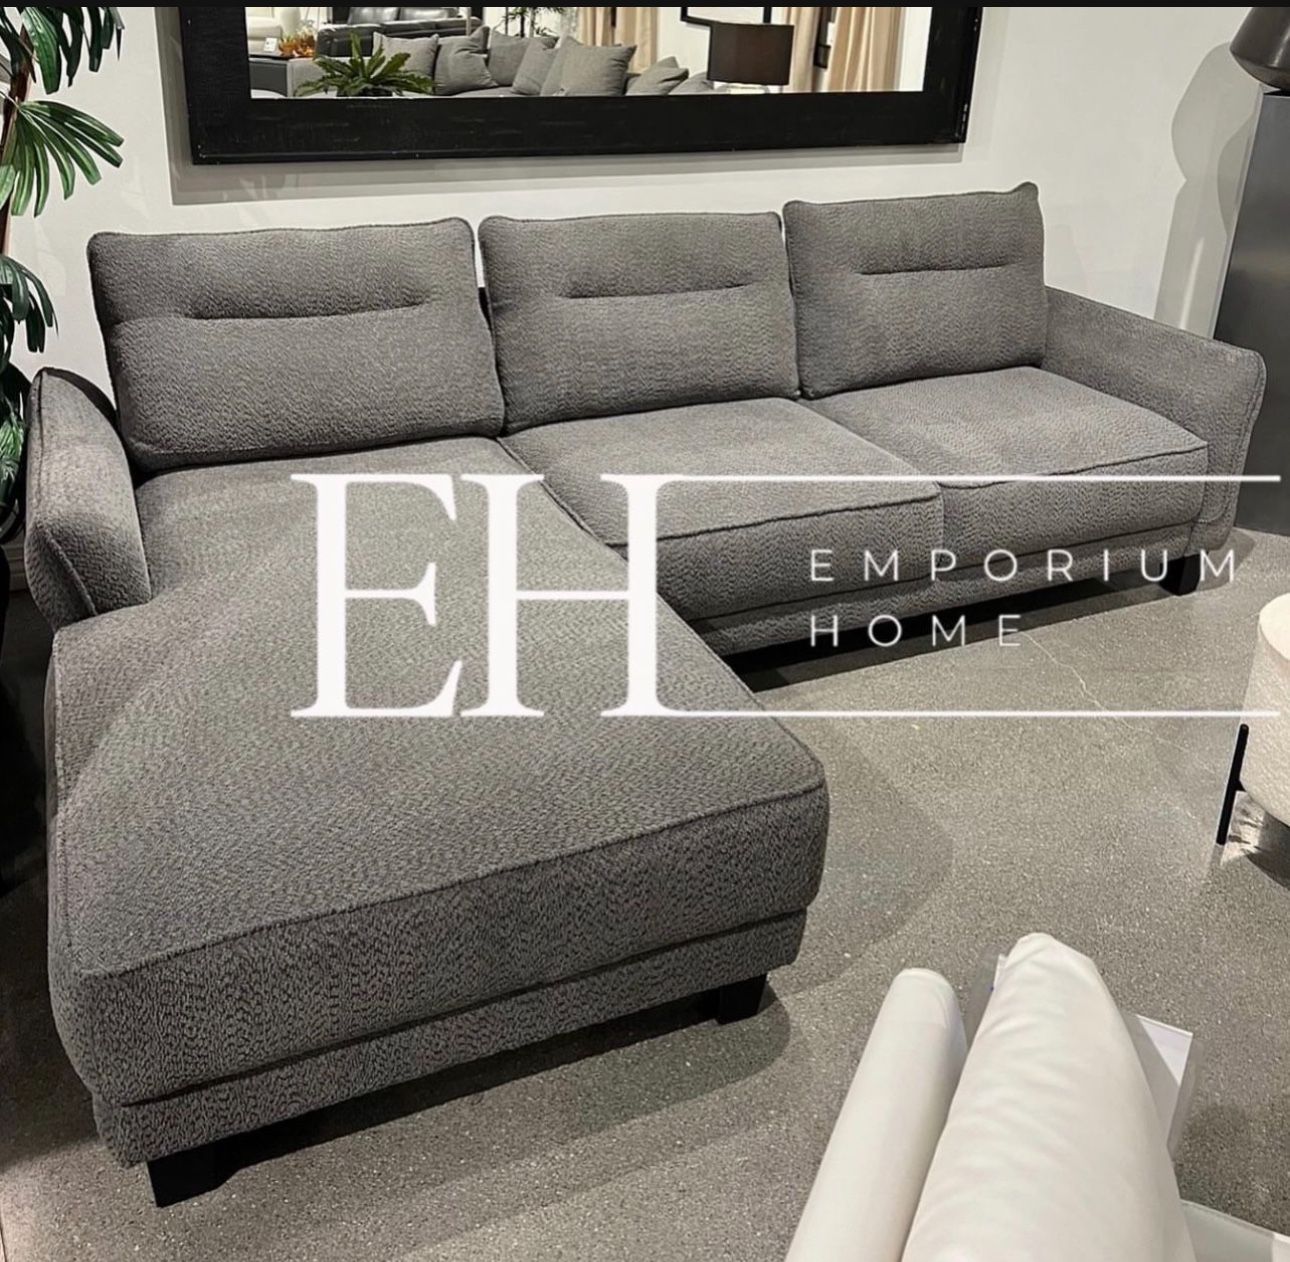 Grey Or White Sofa Sectional 🔥buy Now Pay Later 